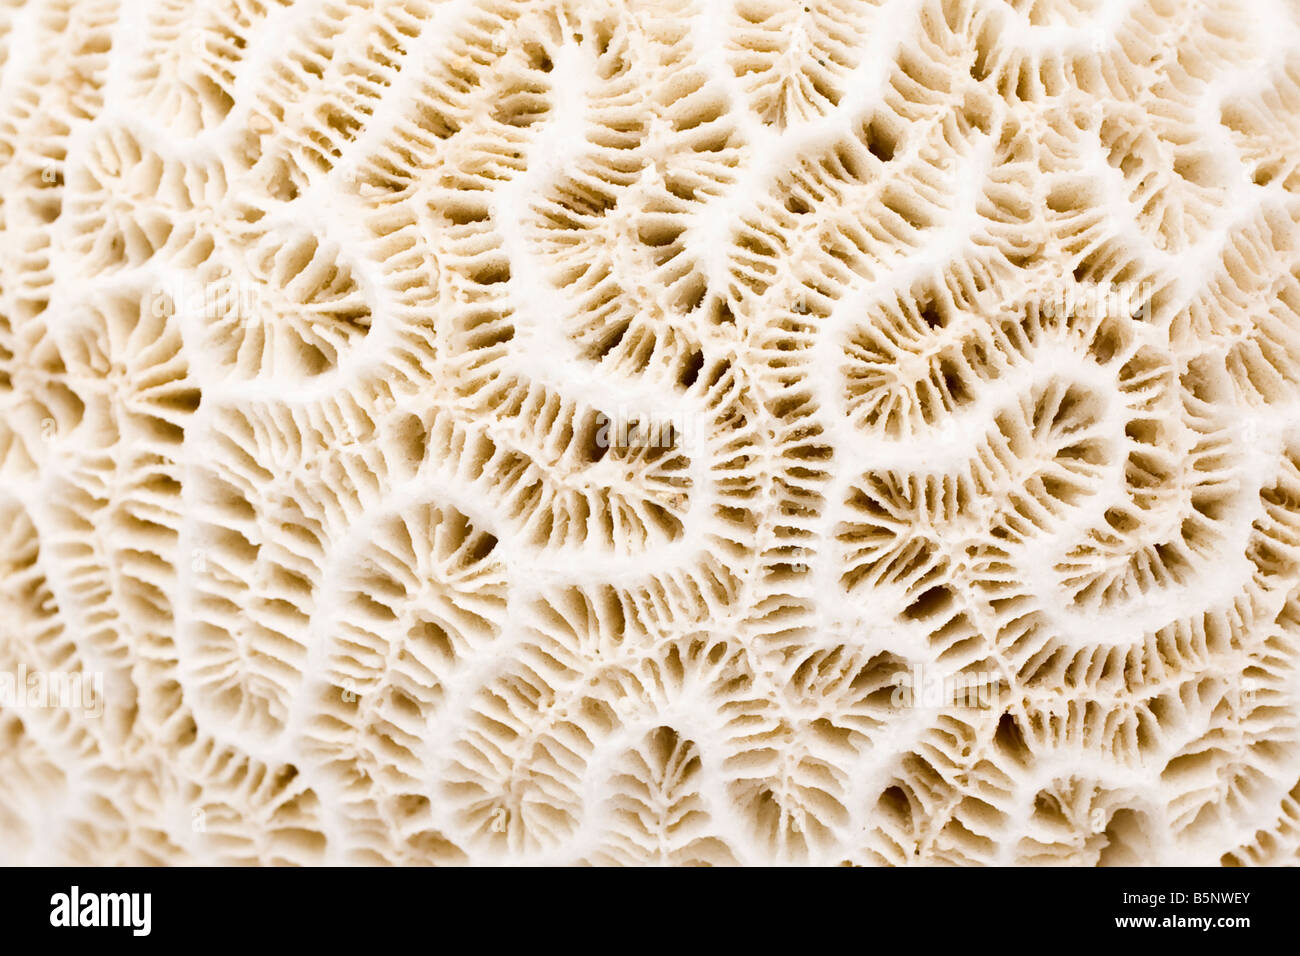 White coral from British Virgin Islands Carribean, brain like in appearance. Stock Photo